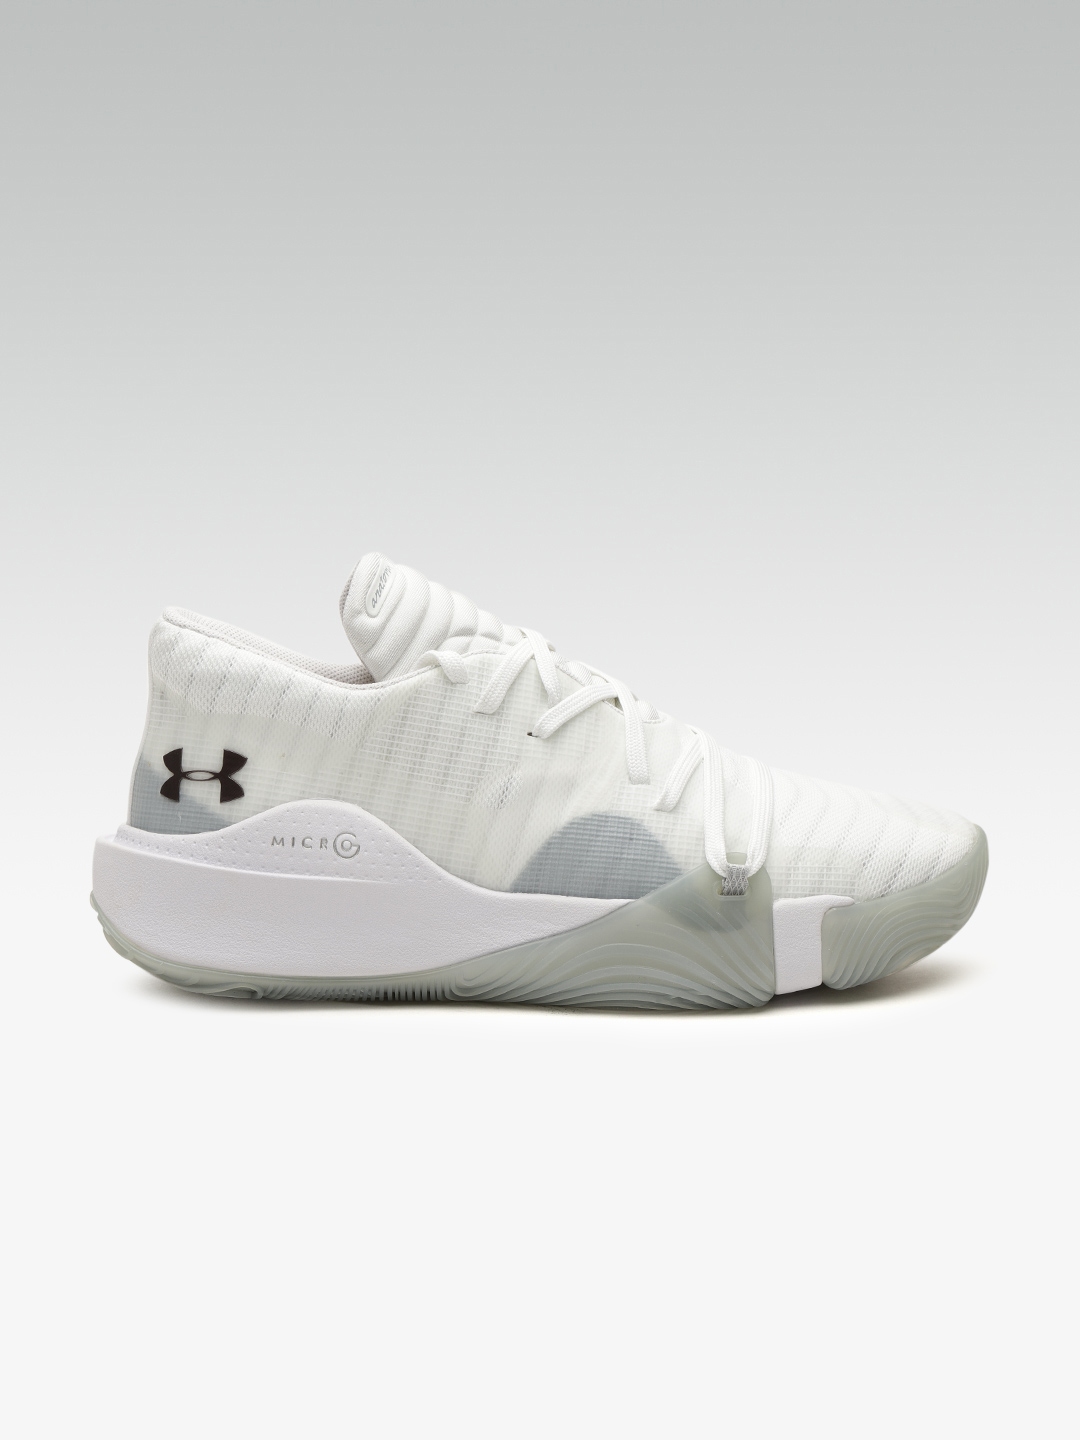 Under Armour Shoes For Men White - almoire